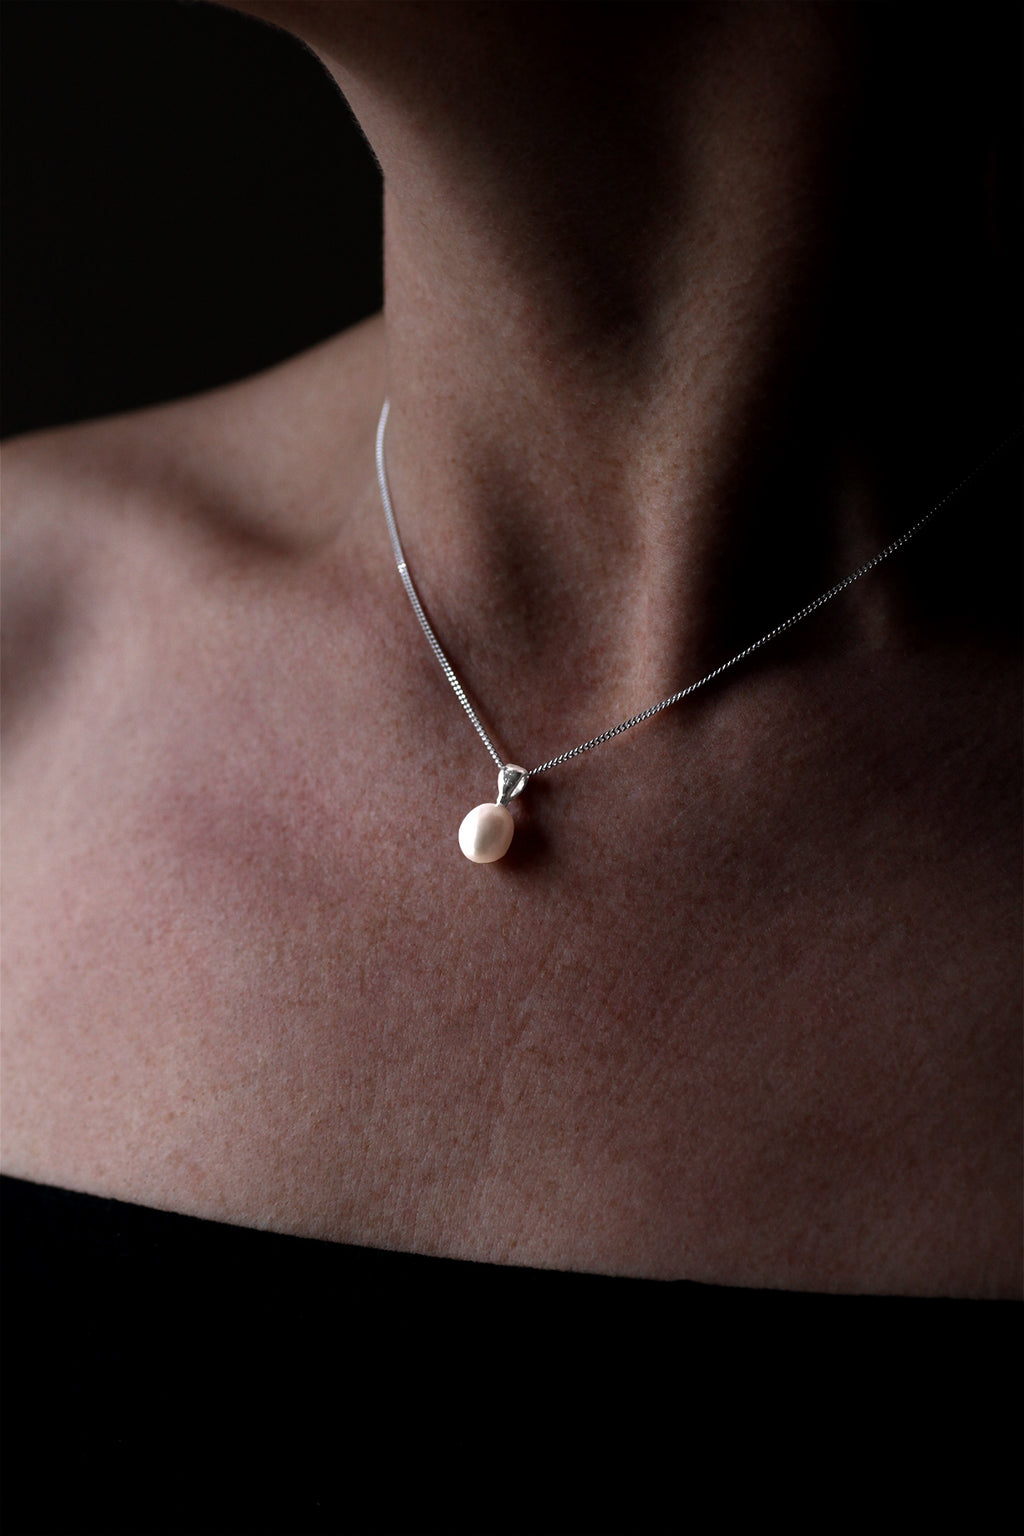 White Gold Pink Pearl Pendant